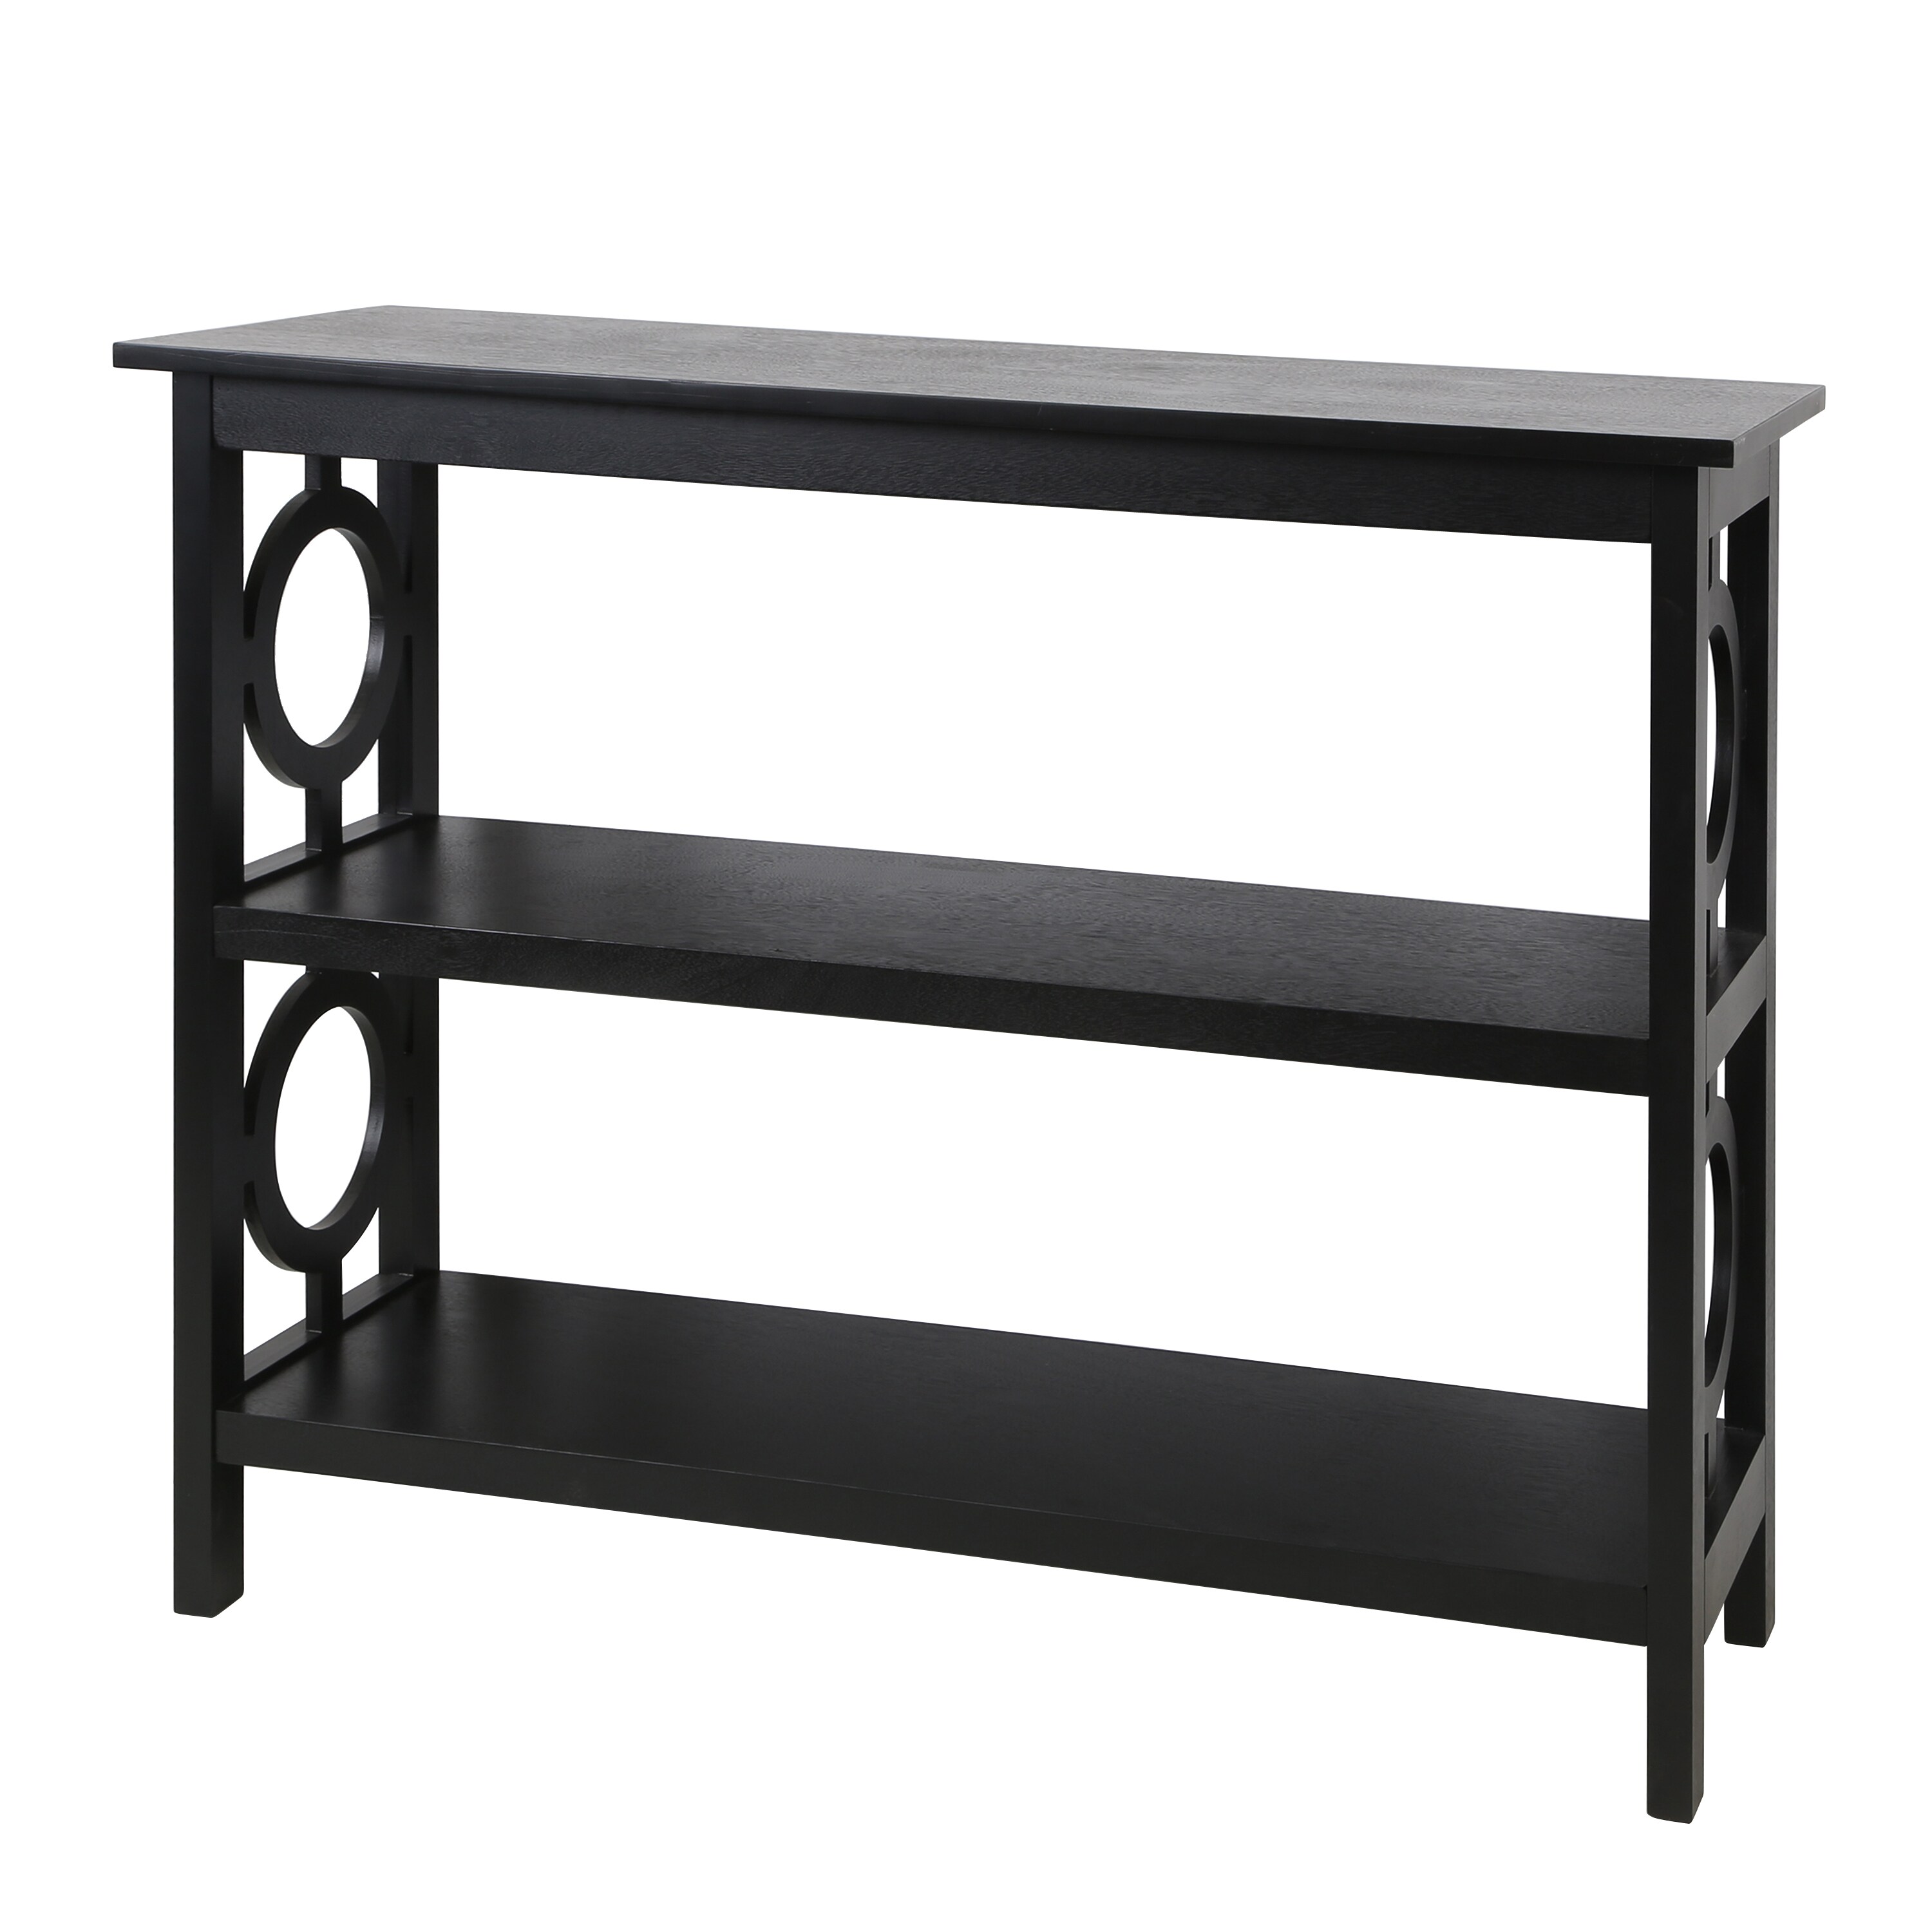 42 Inch Wide Bookcases at Lowes.com